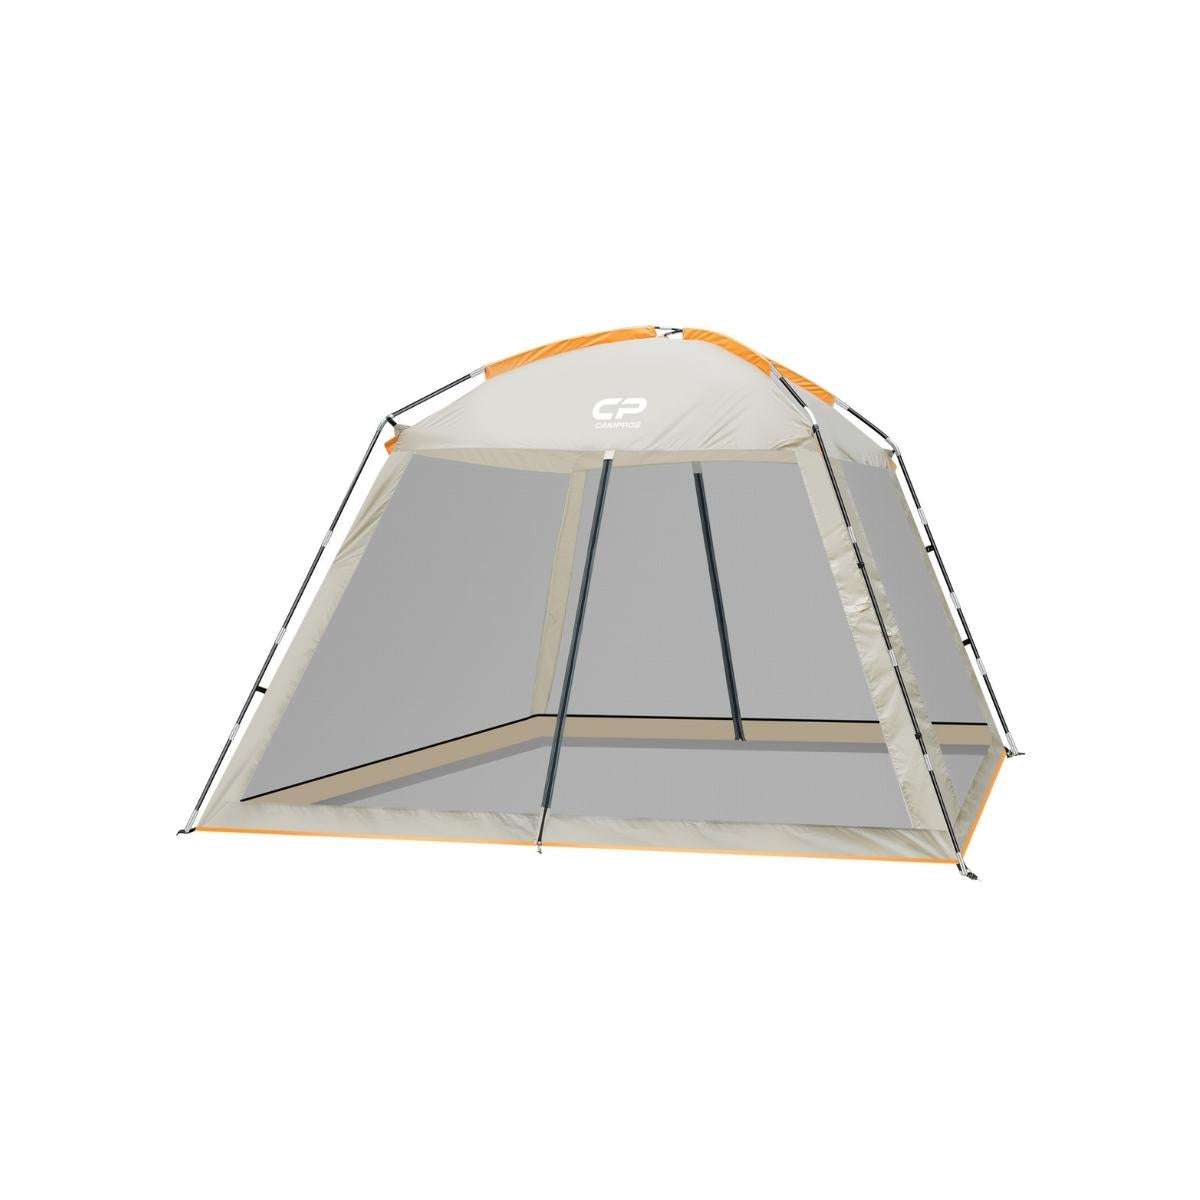 CAMPROS Screen House 10 x 10 Ft Canopy Tent-Canopy Tents-Campros Tent